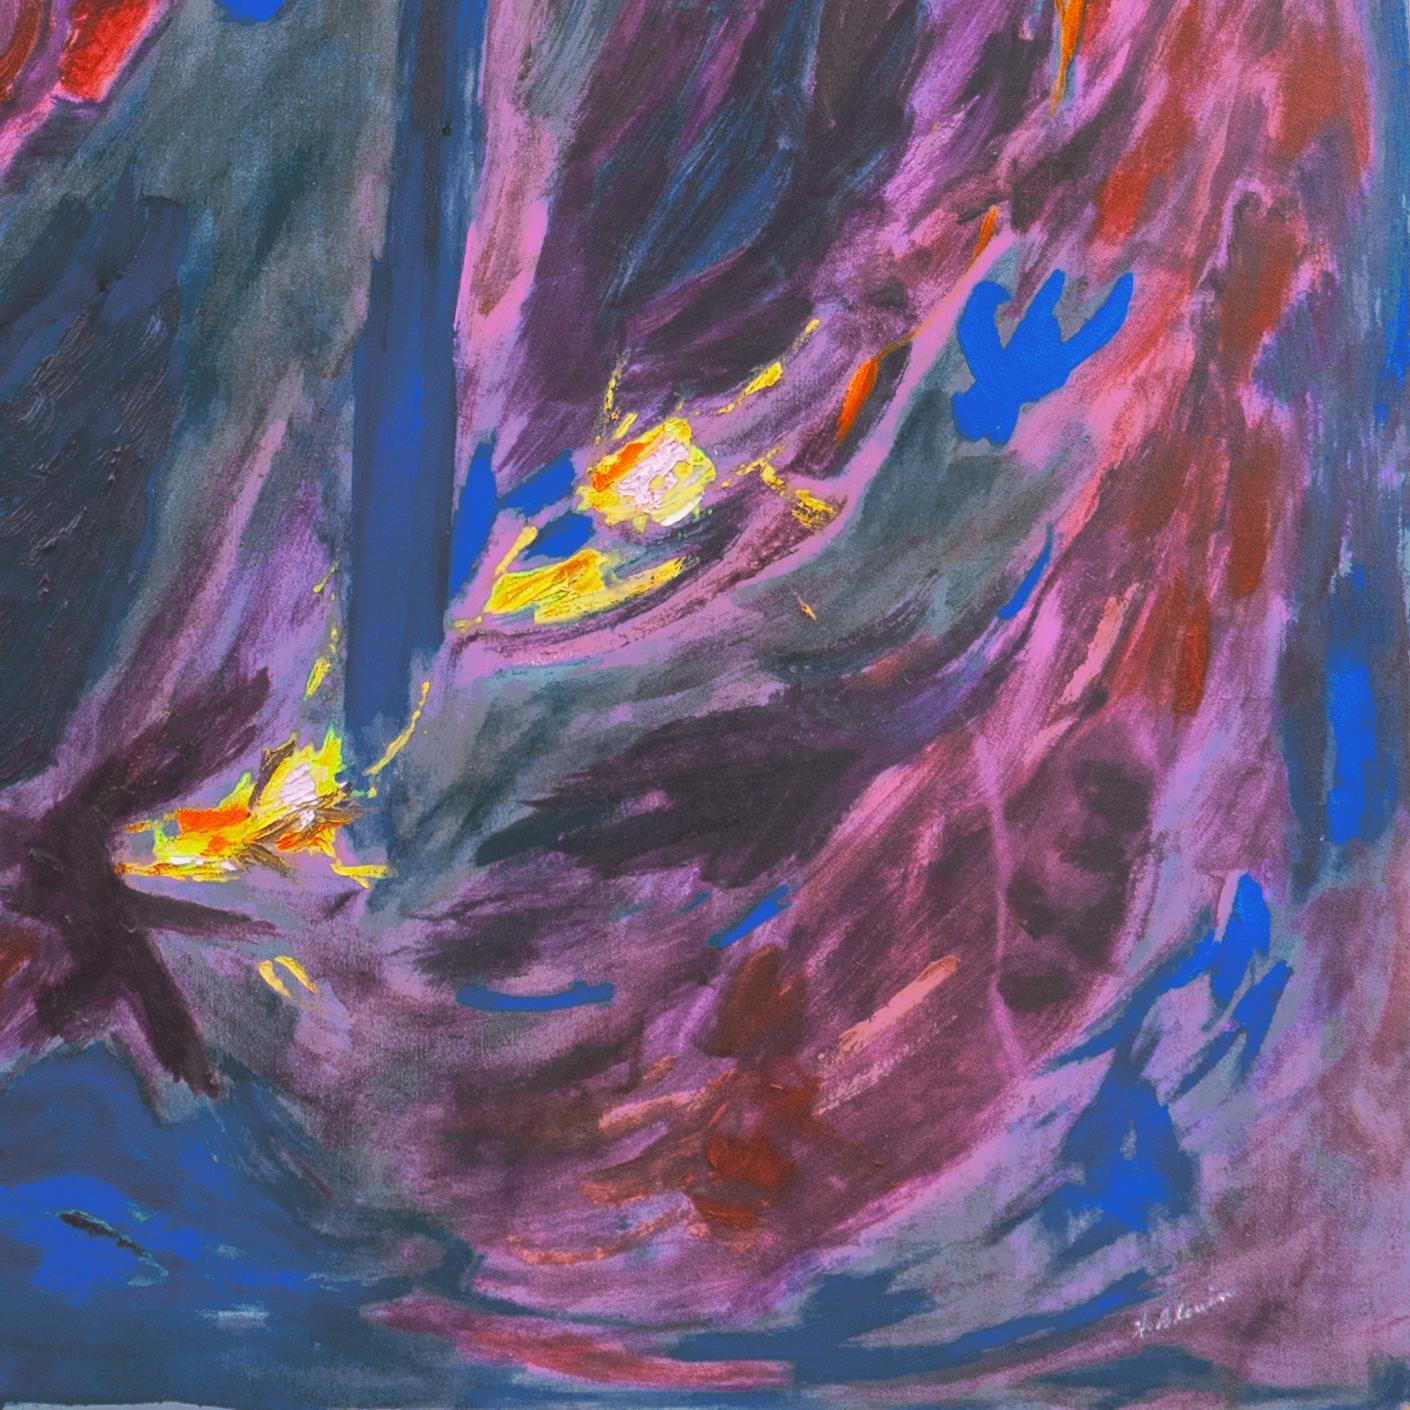 Signed lower right, 'H. Blouin' and painted circa 1975.

A substantial oil abstract comprising dynamic, flame-like swirls of violet, yellow, scarlet and blue appearing to define a central charcoal sphere. 
